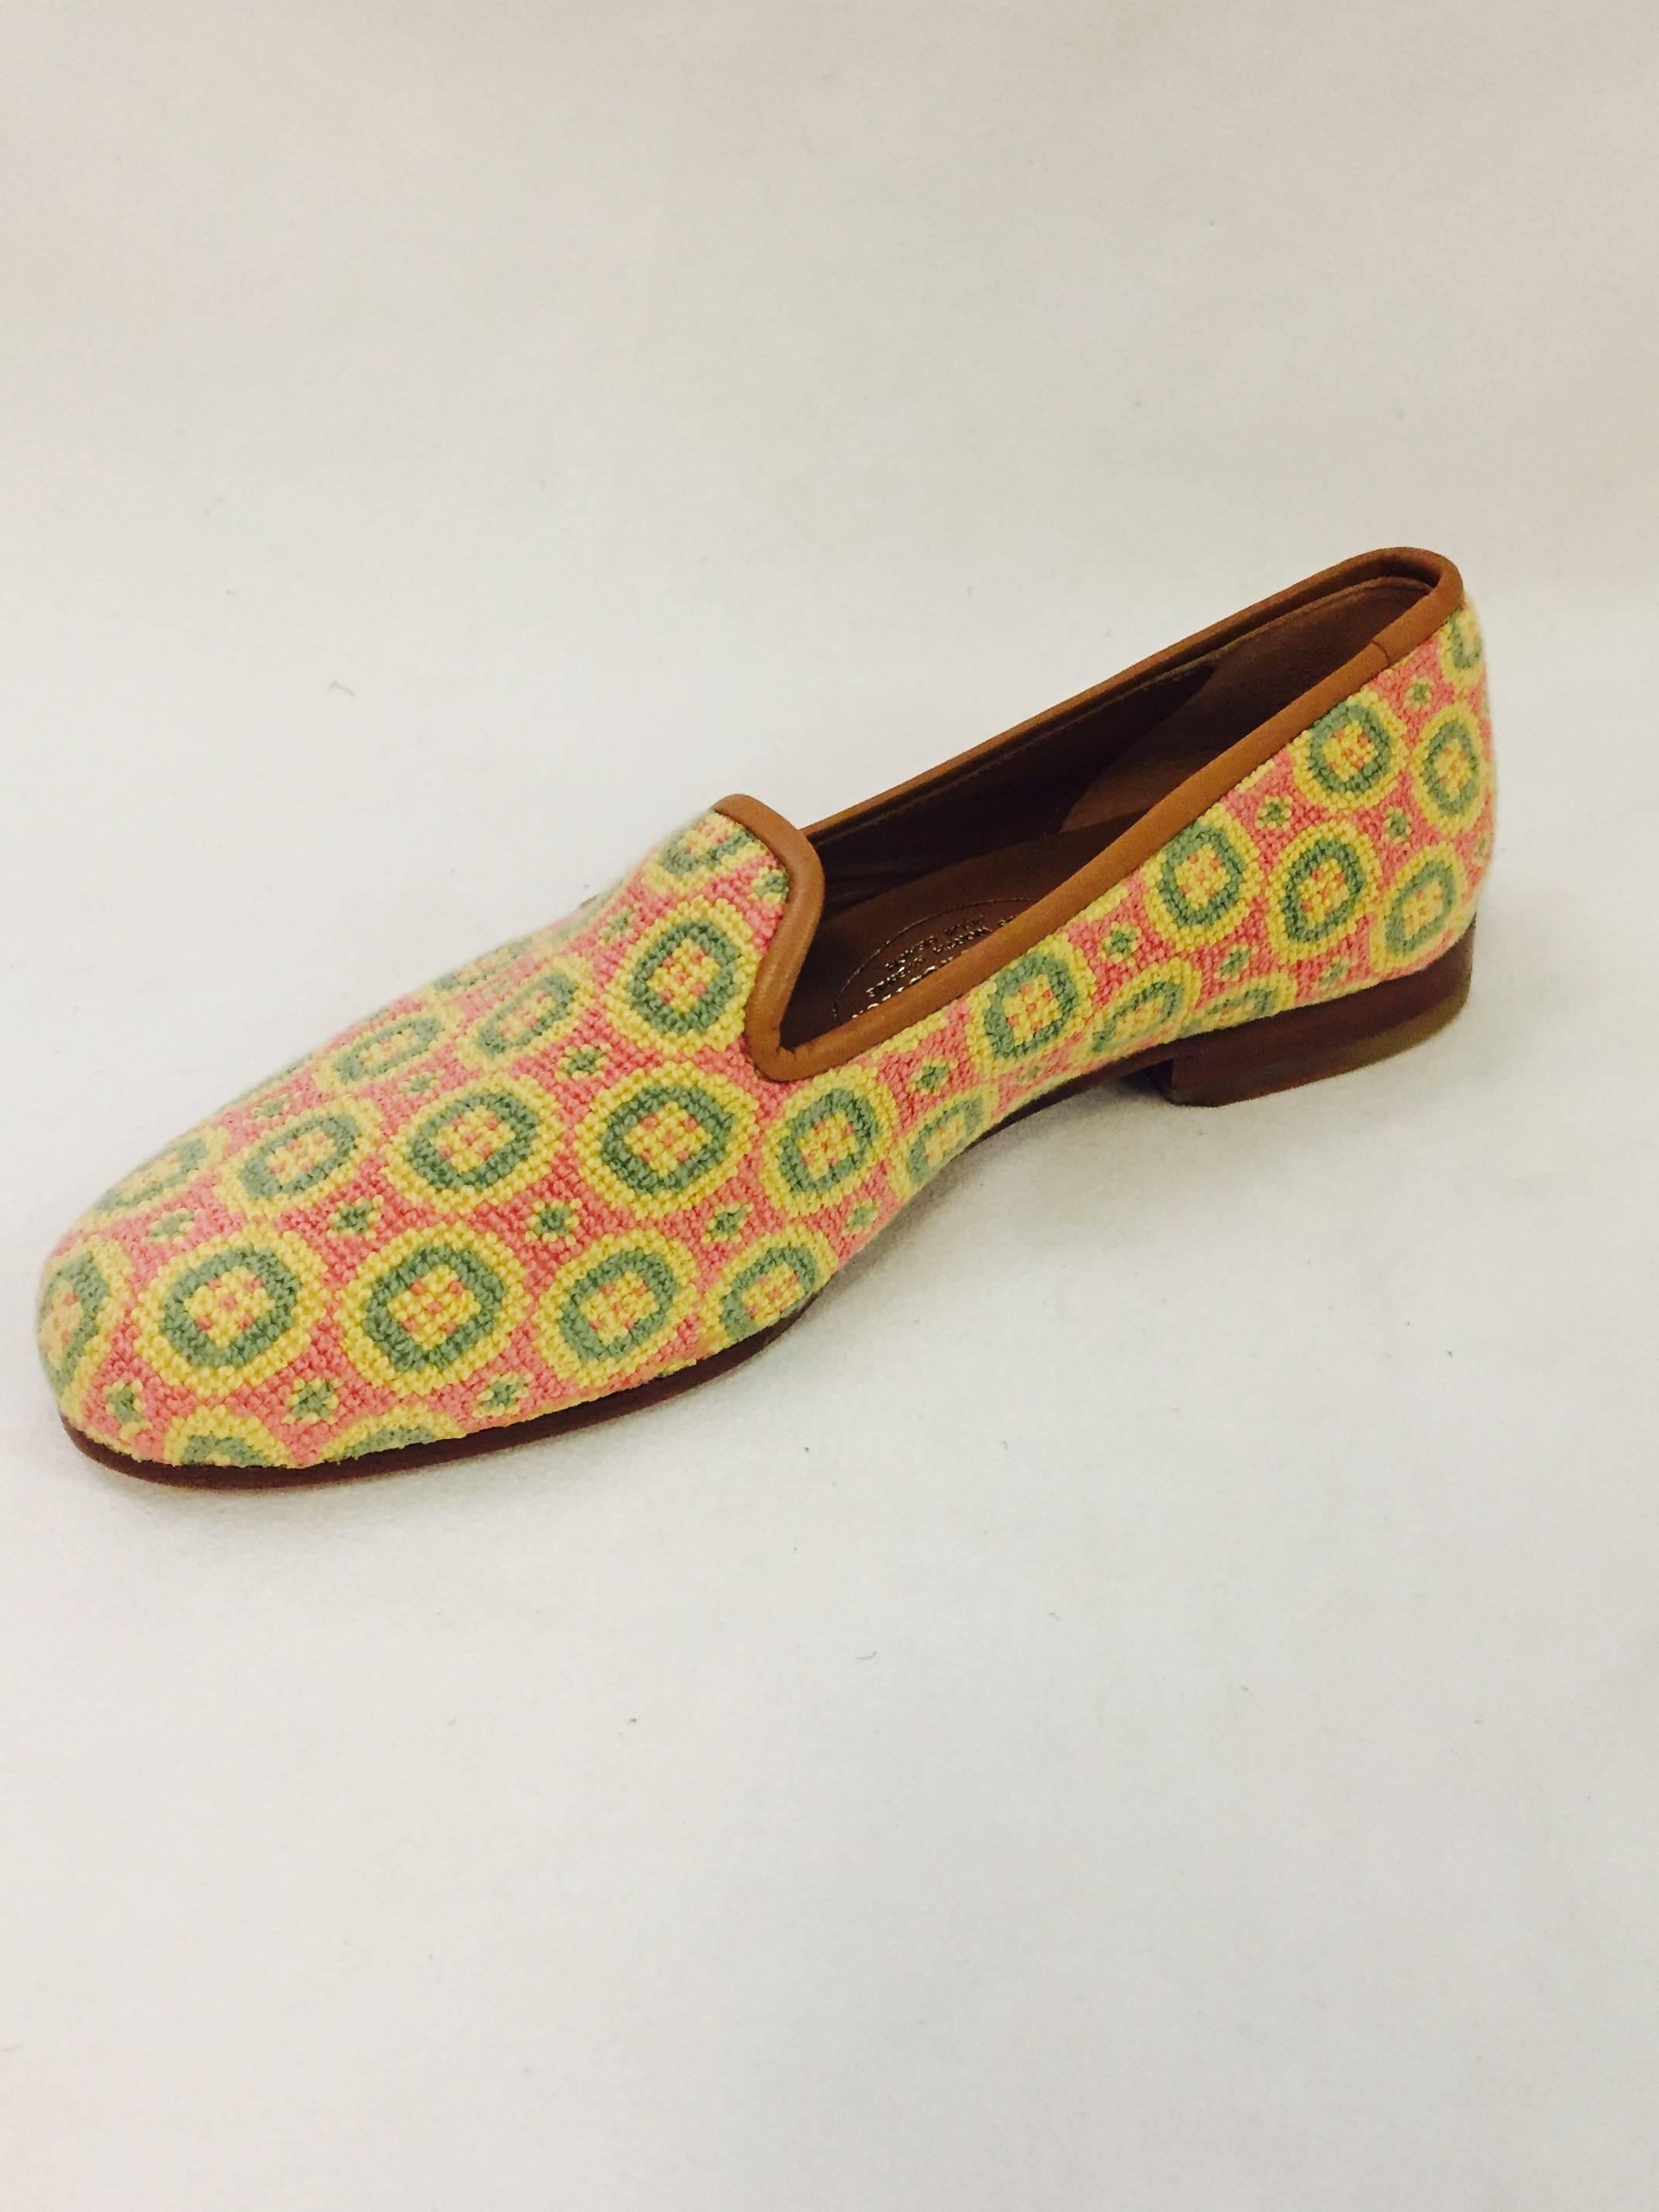 Stubbs & Wootton Slippers in outstanding needlepoint fabric comprised of multi colored circles of yellow, green and pink across the exterior of the shoes.  These shoes are fully lined in beige leather on the sole and insole.  The shoes have a